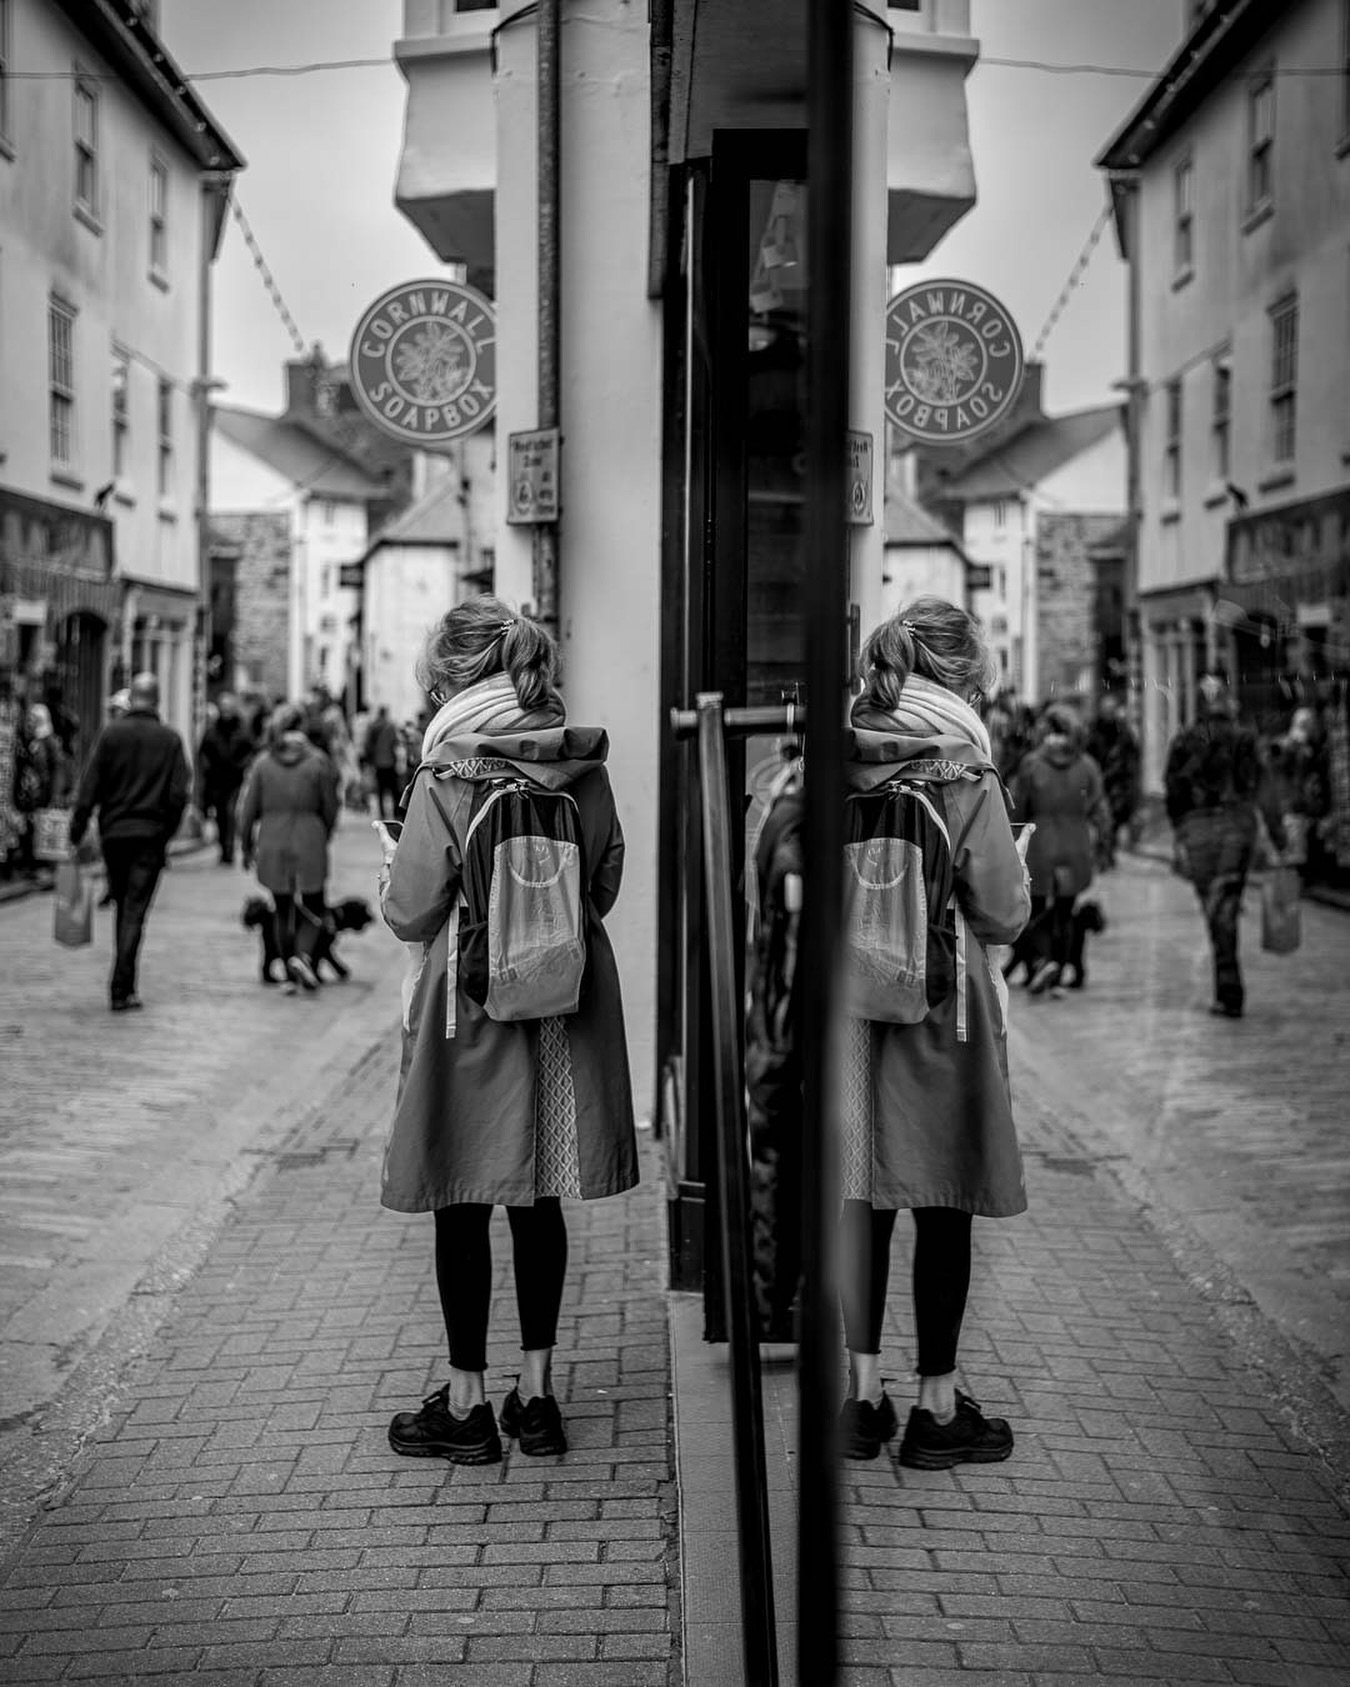 Reflecting in St. Ives streets &hellip;

Mar 2024 | St. Ives, England
Leica M11-P |Summilux-M 35 f/1.4
&copy; 2024 Simon R. Cole

#Leica #LeicaM #LeicaUK #LeicaPhotography #ShotWideOpen #BnW #BnWPhoto
#BnWPhotography #Harbour #Masters_in_BnW #Incredi